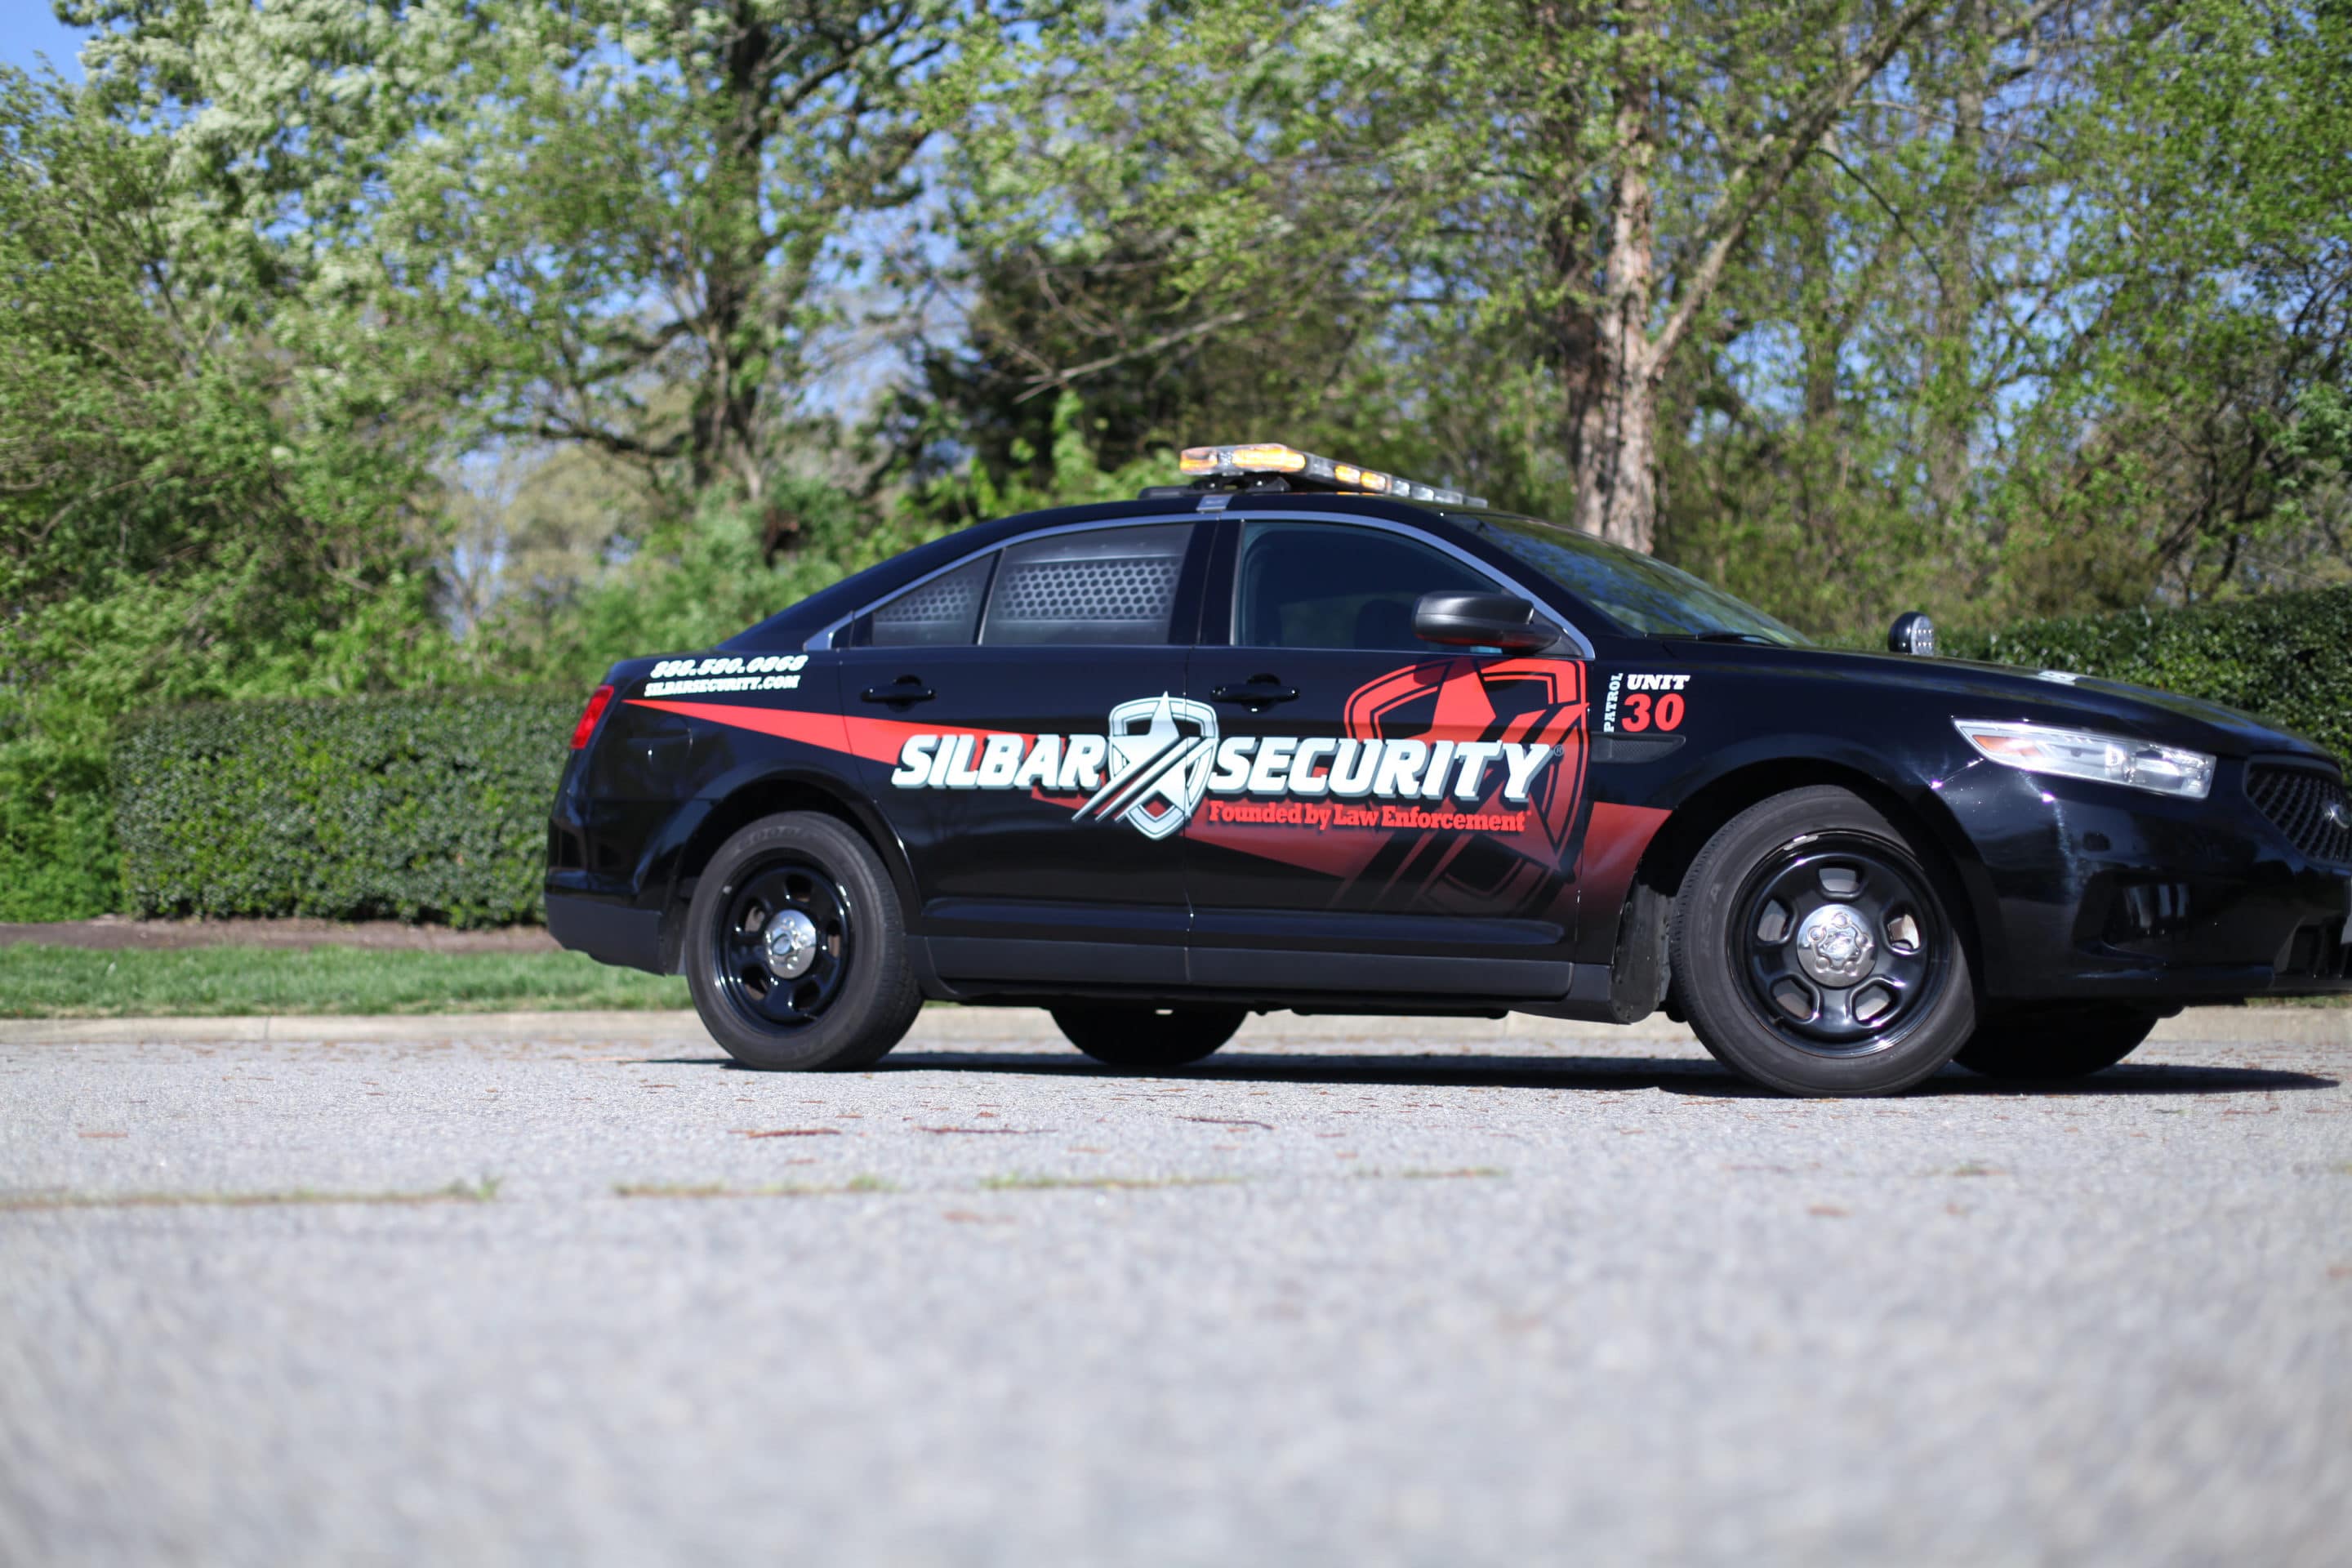 security car parked outside